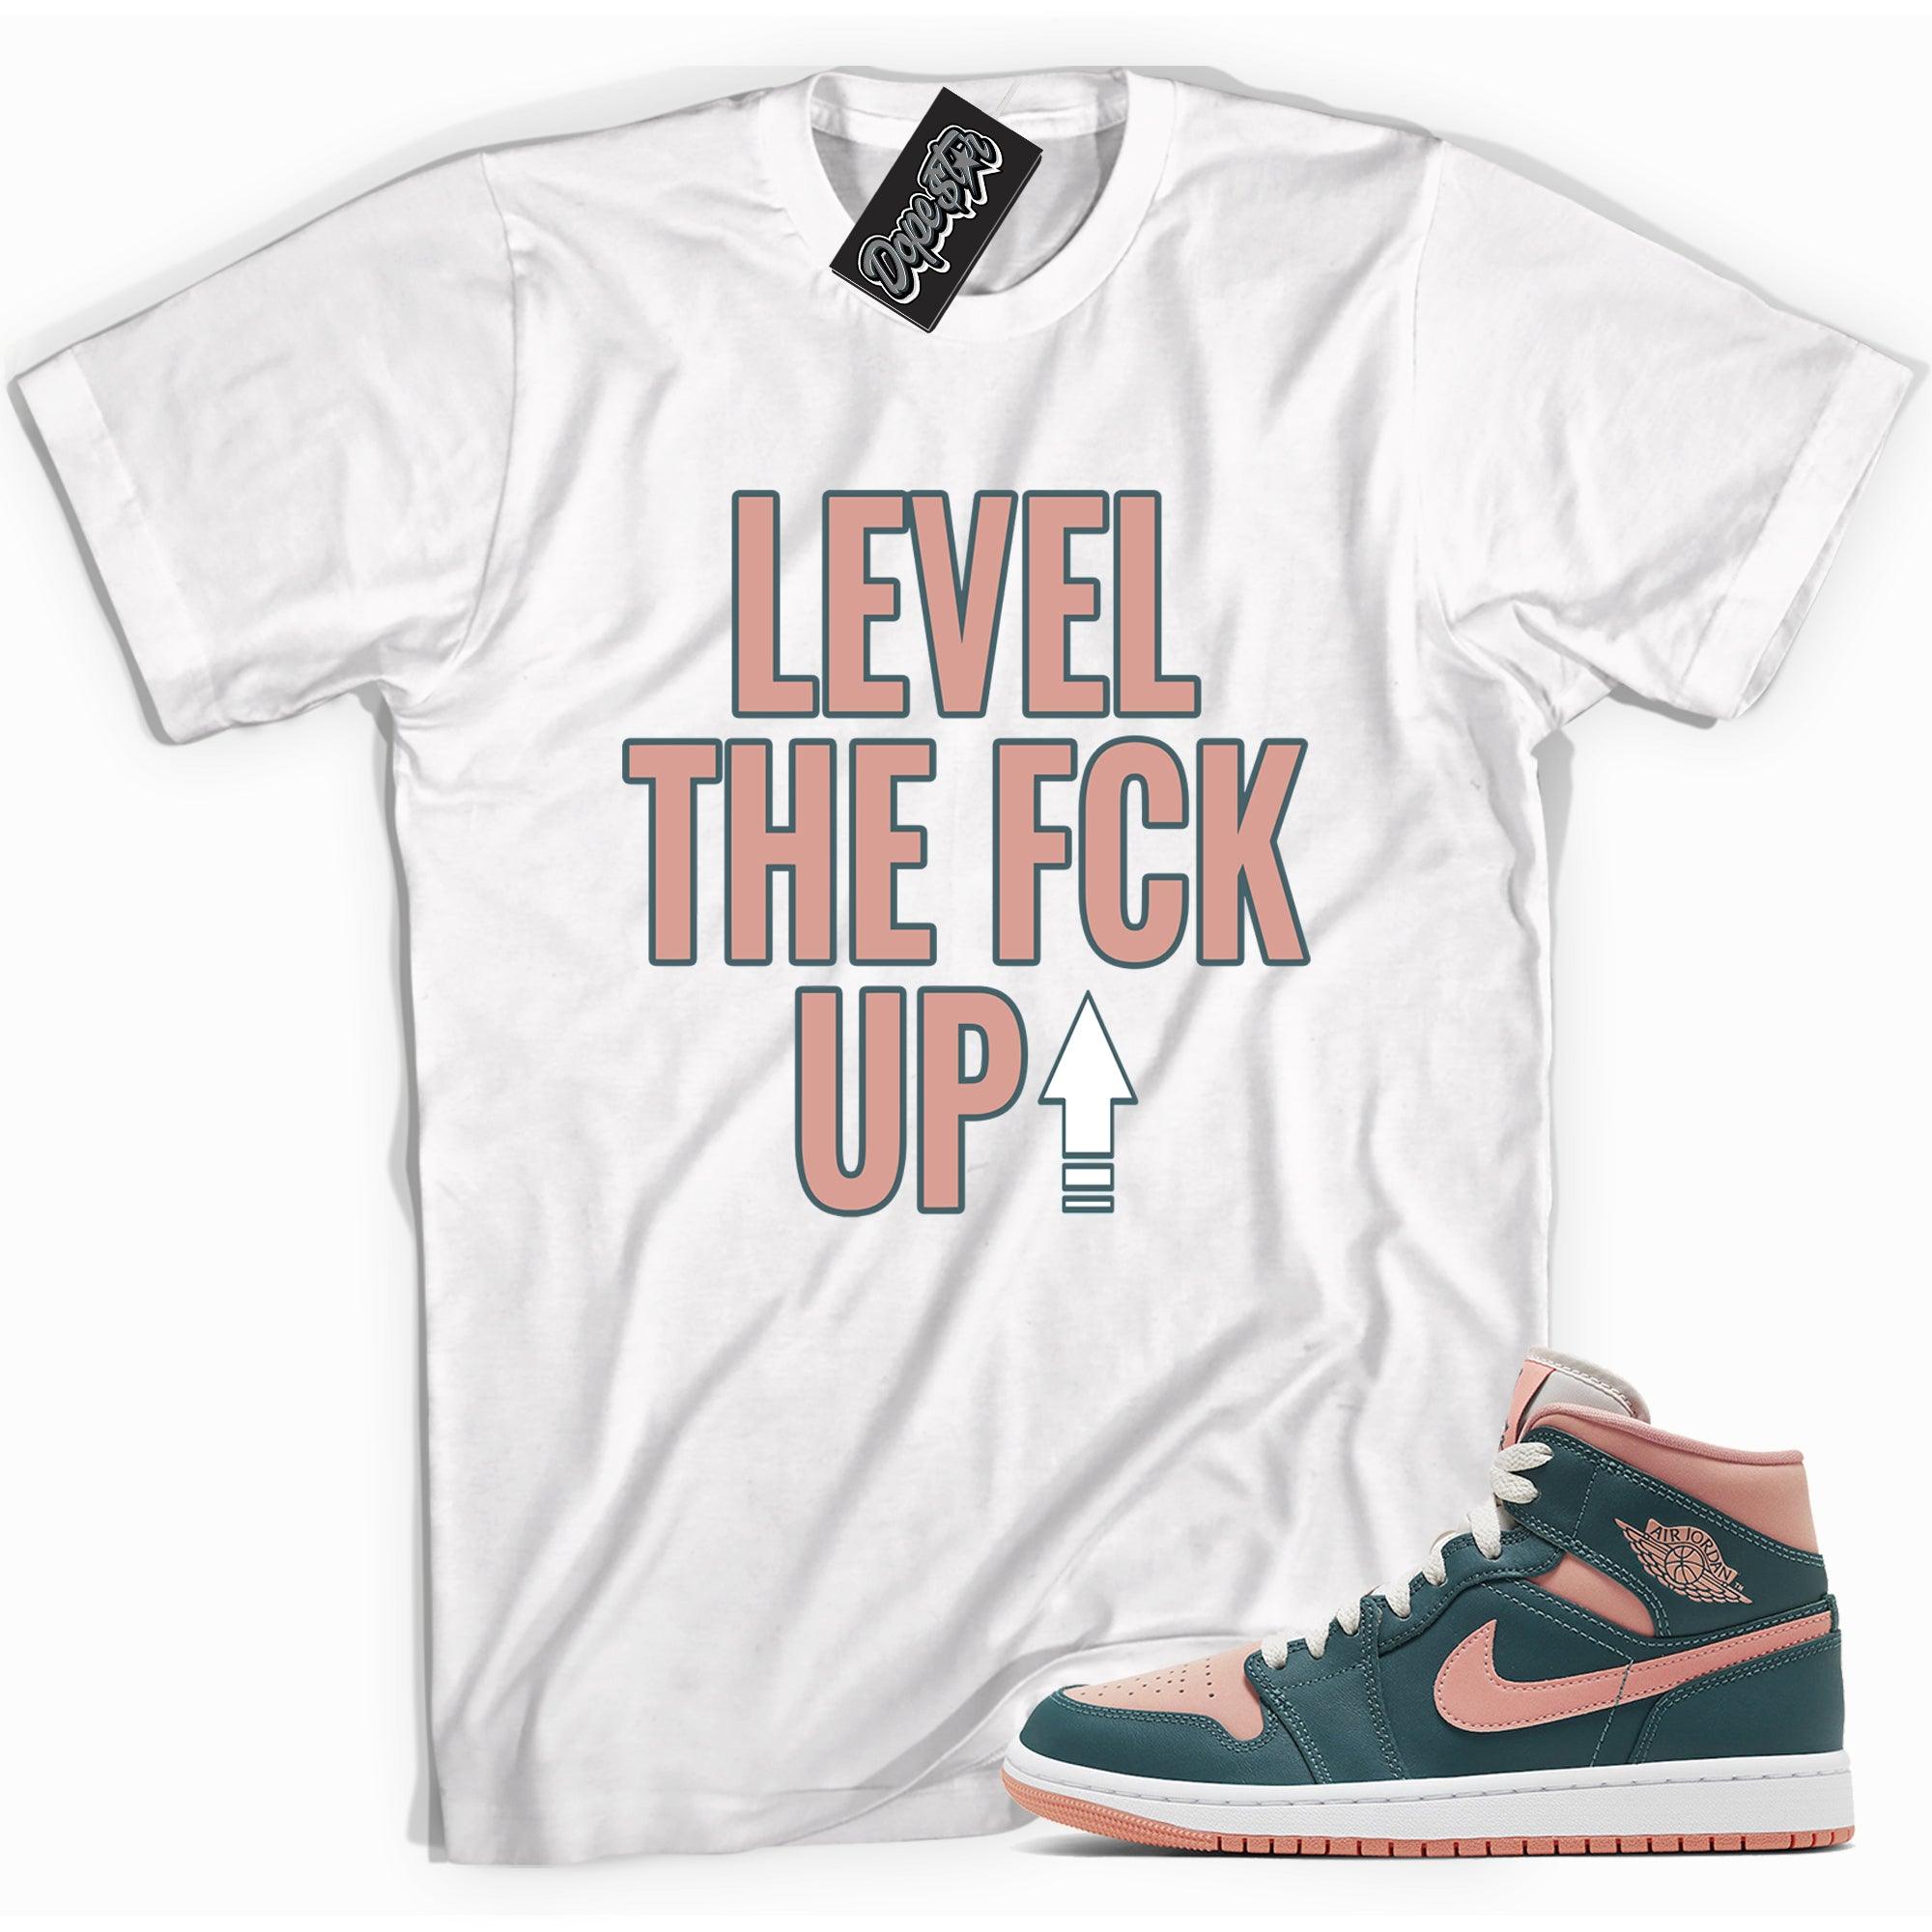 Cool white graphic tee with 'Level Up' print, that perfectly matches Air Jordan 1 Mid Dark Teal Green Toe sneakers.